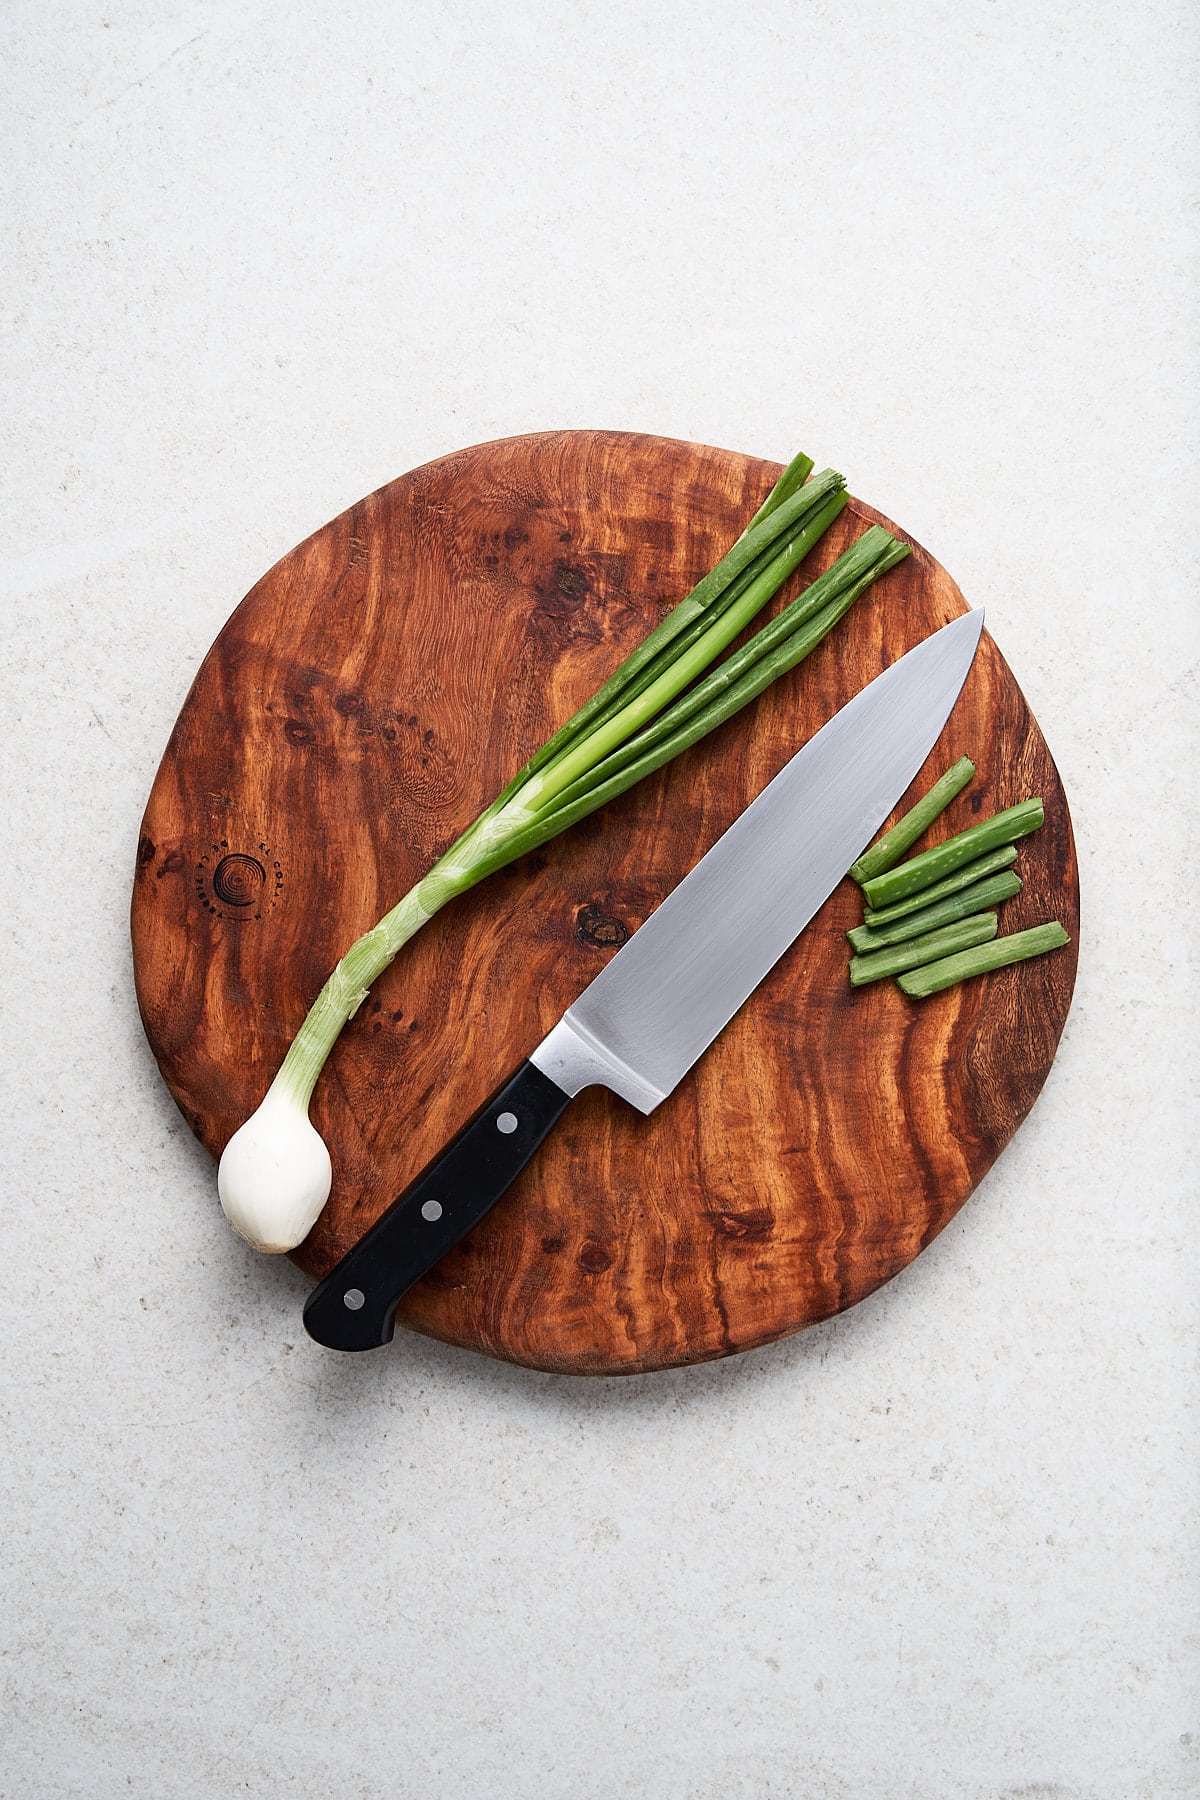 Trimmed green onions on a cutting block